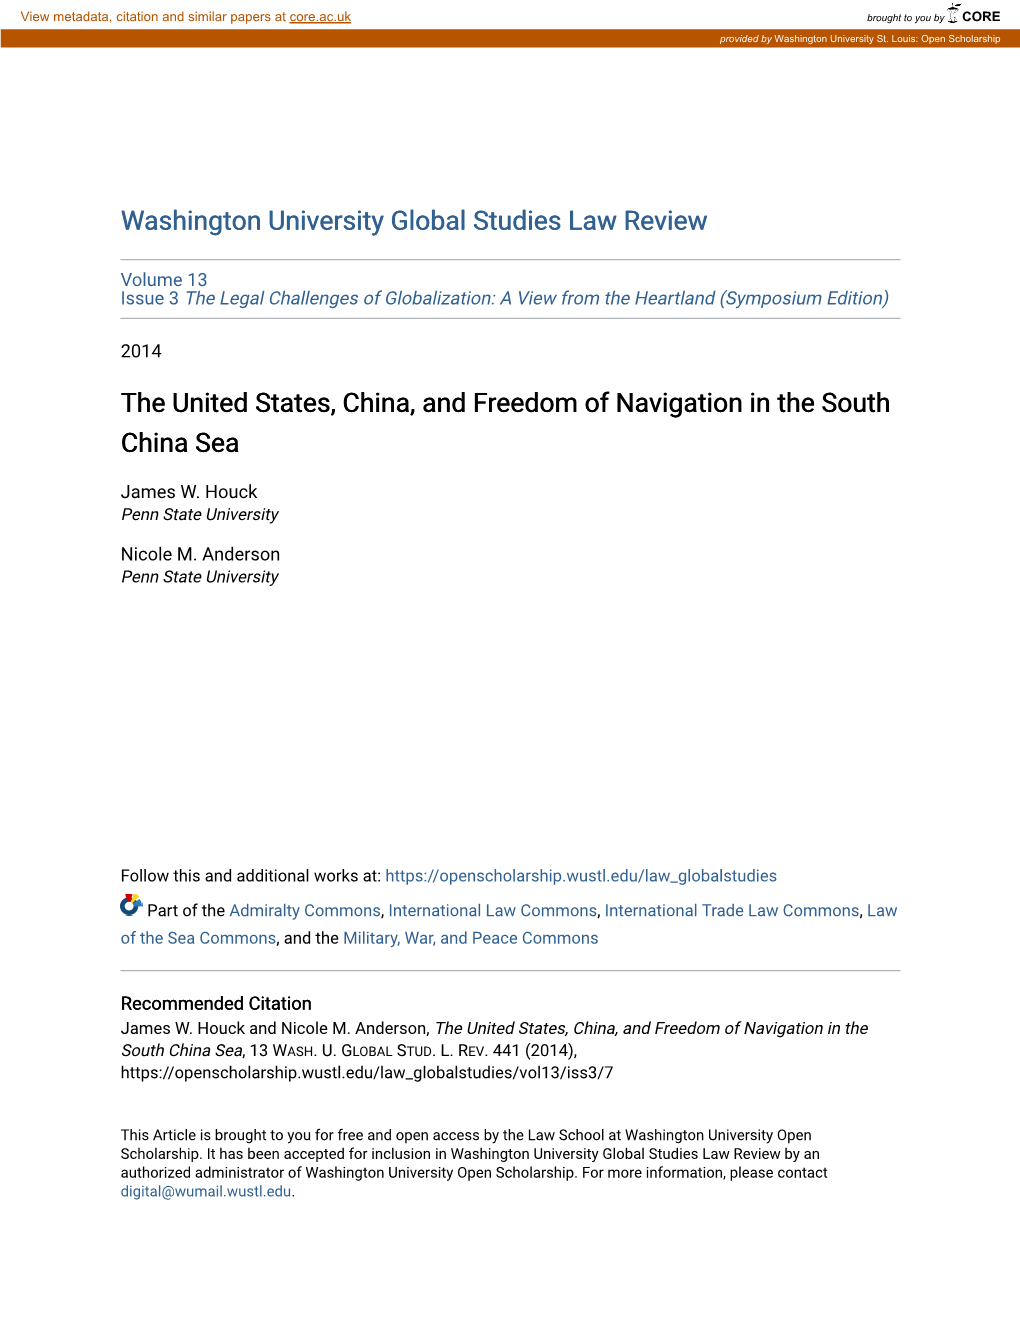 The United States, China, and Freedom of Navigation in the South China Sea